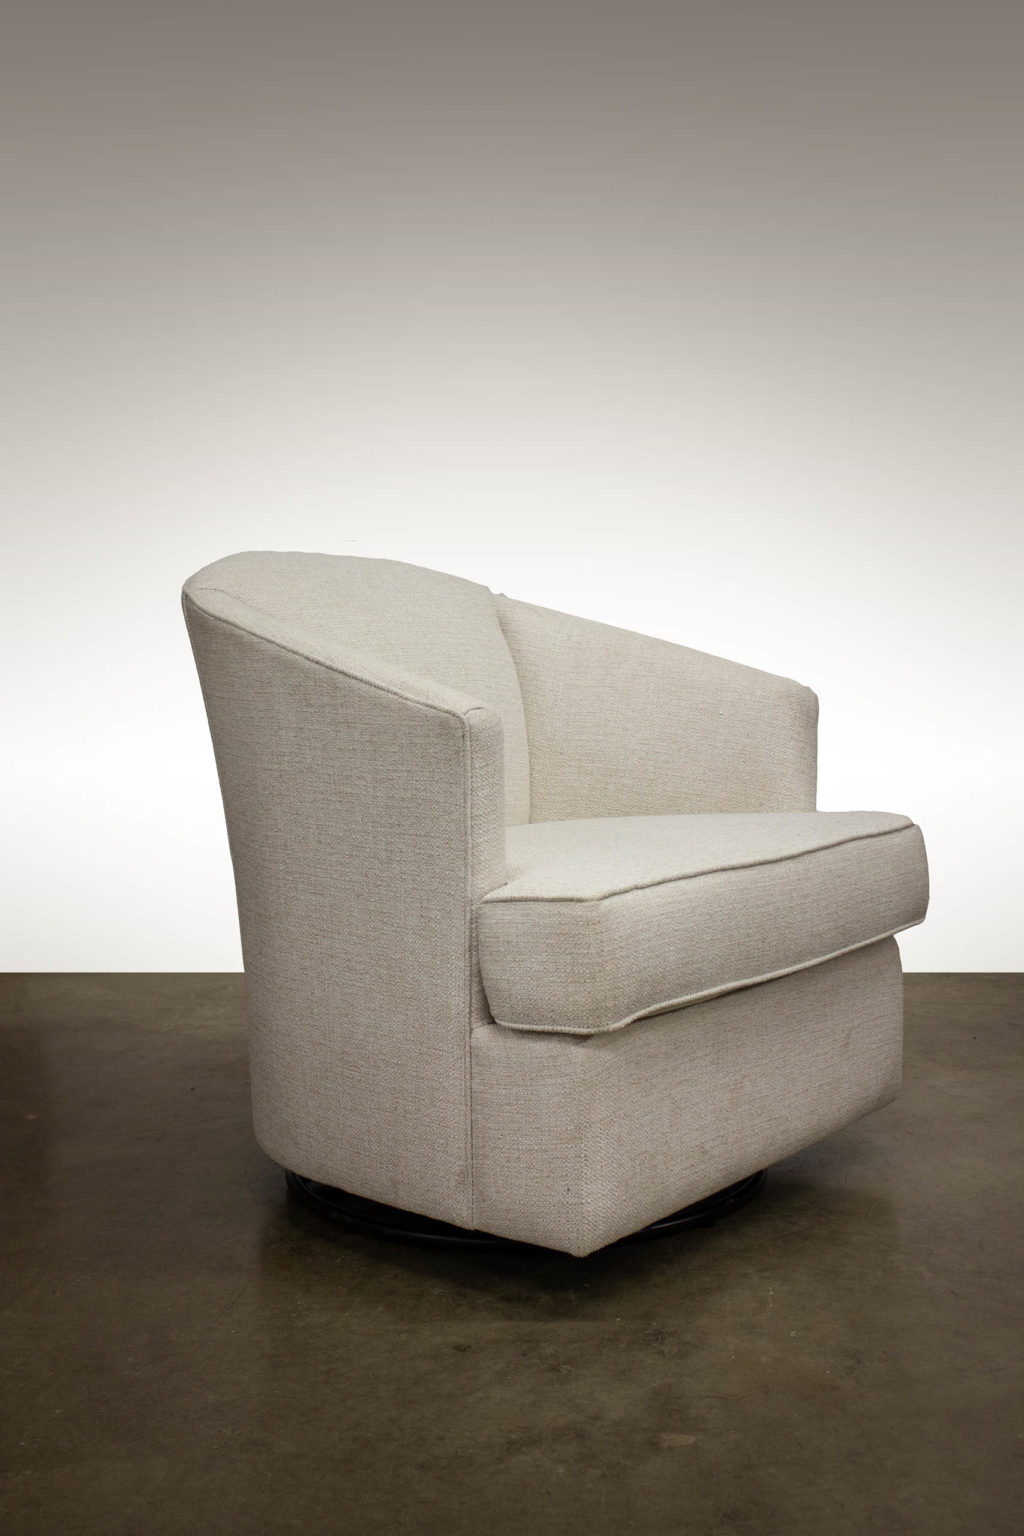 Upholstered Swivel Chairs | Adams Furniture